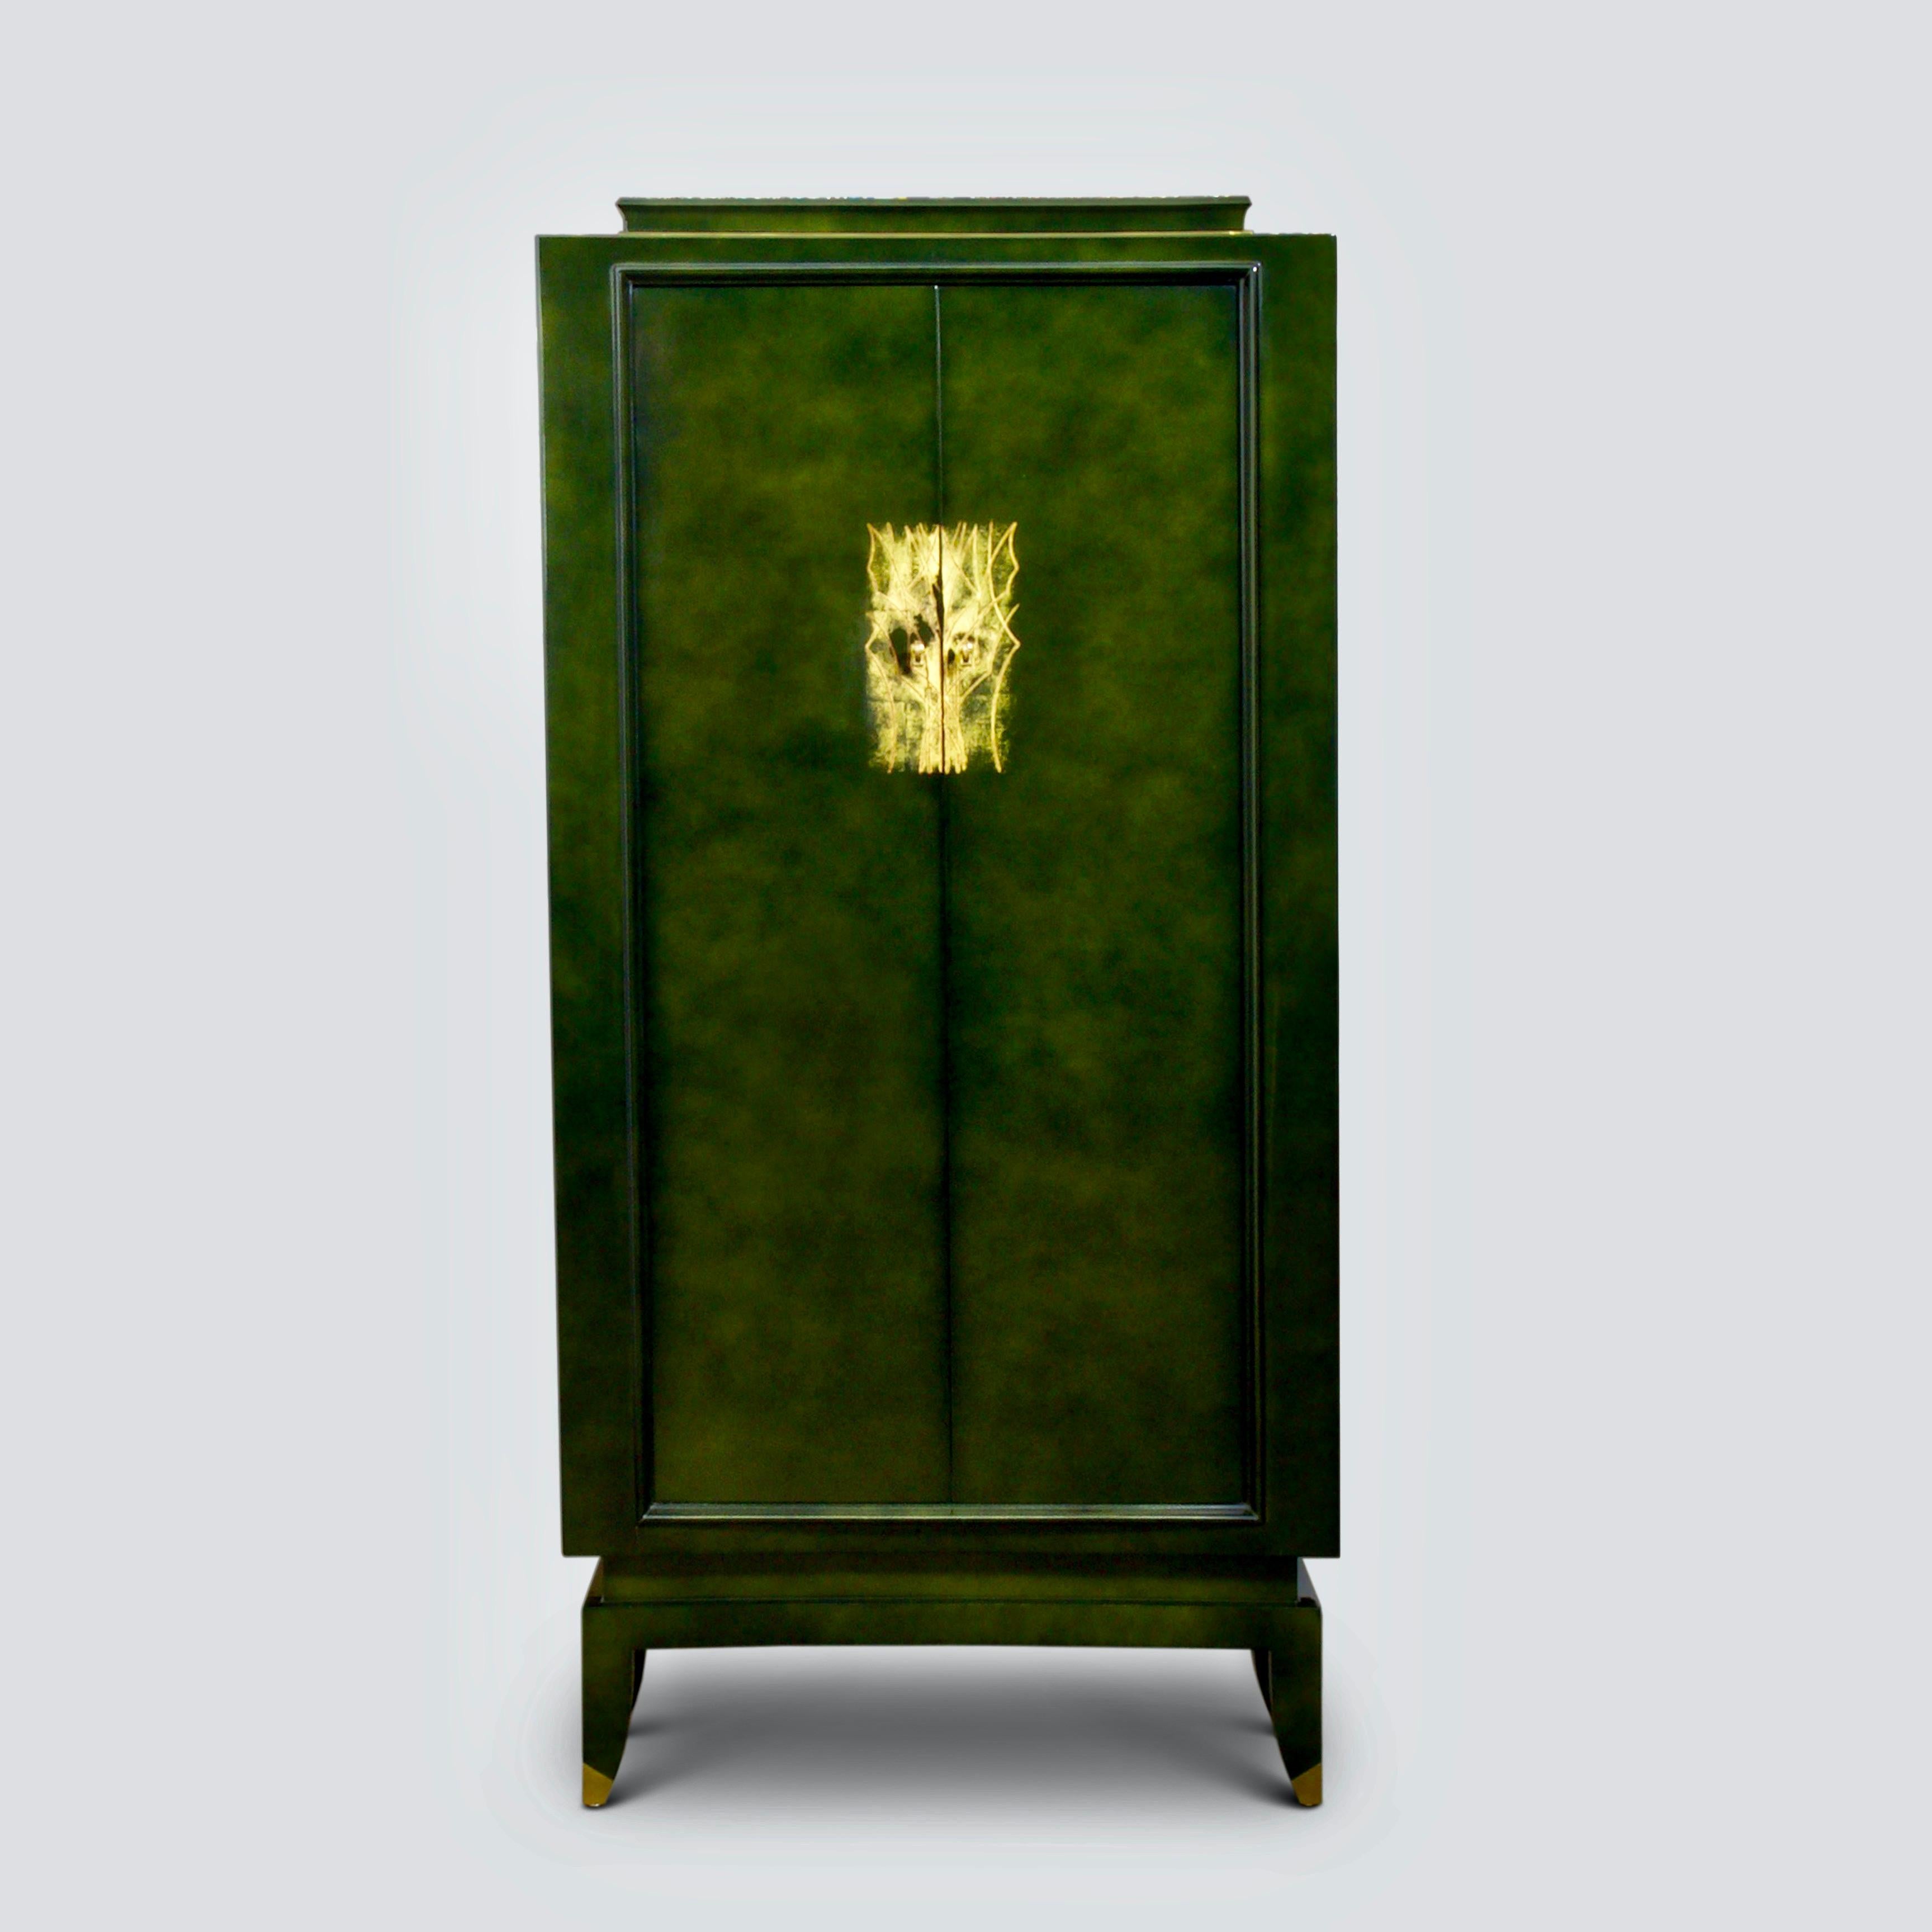 An important green lacquer and gilt cabinet by Andre Domin & Marcel Genevriere for Maison Dominique, circa
1945.

Lacquered to a deep green finish overlaid on a gold ground with applied gilt decorative pattern to the doors which lock using a pair